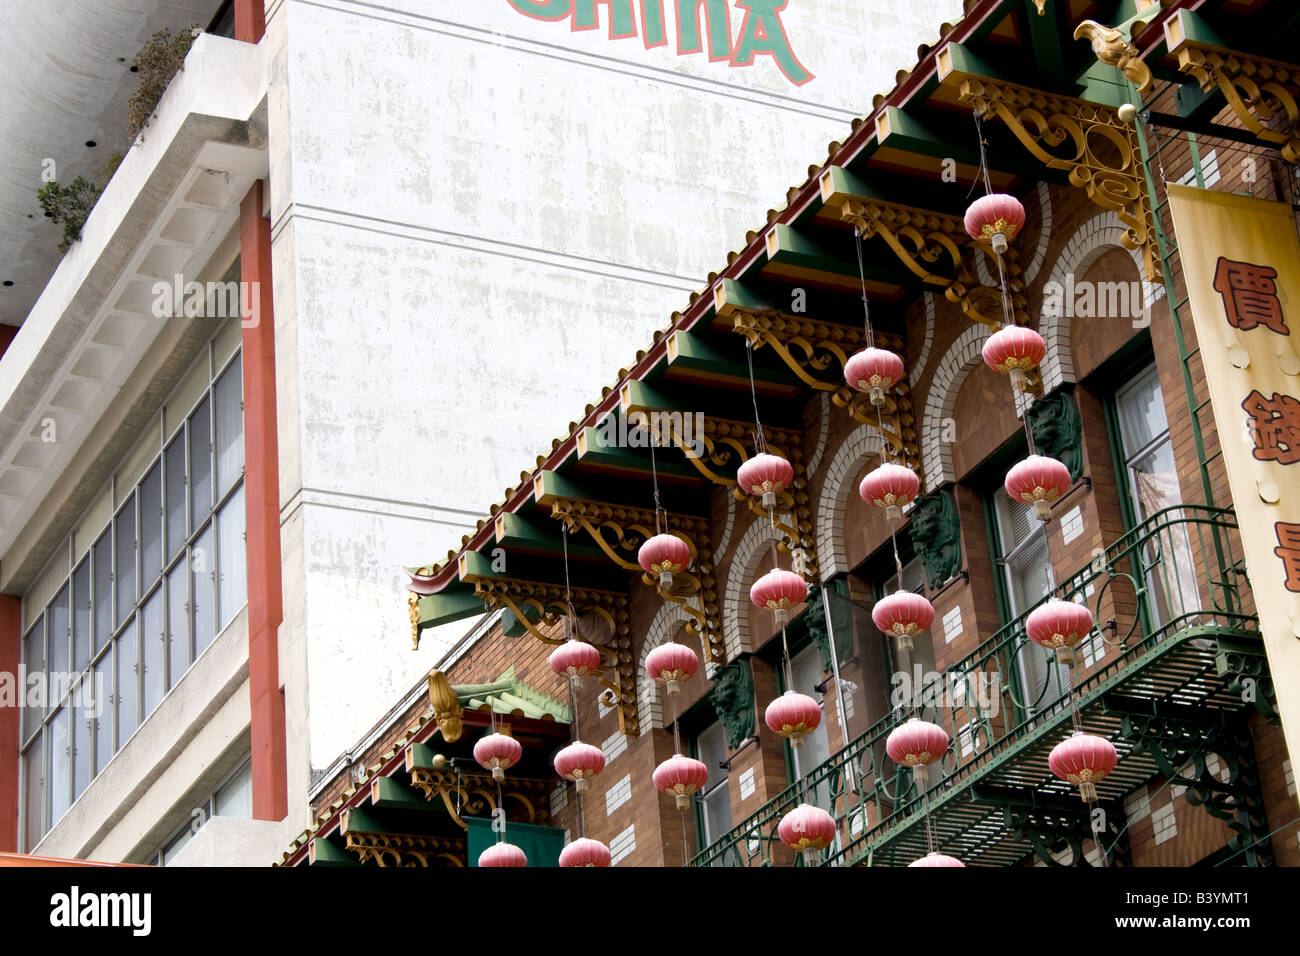 A building in Chinatown, San Francisco, California Stock Photo